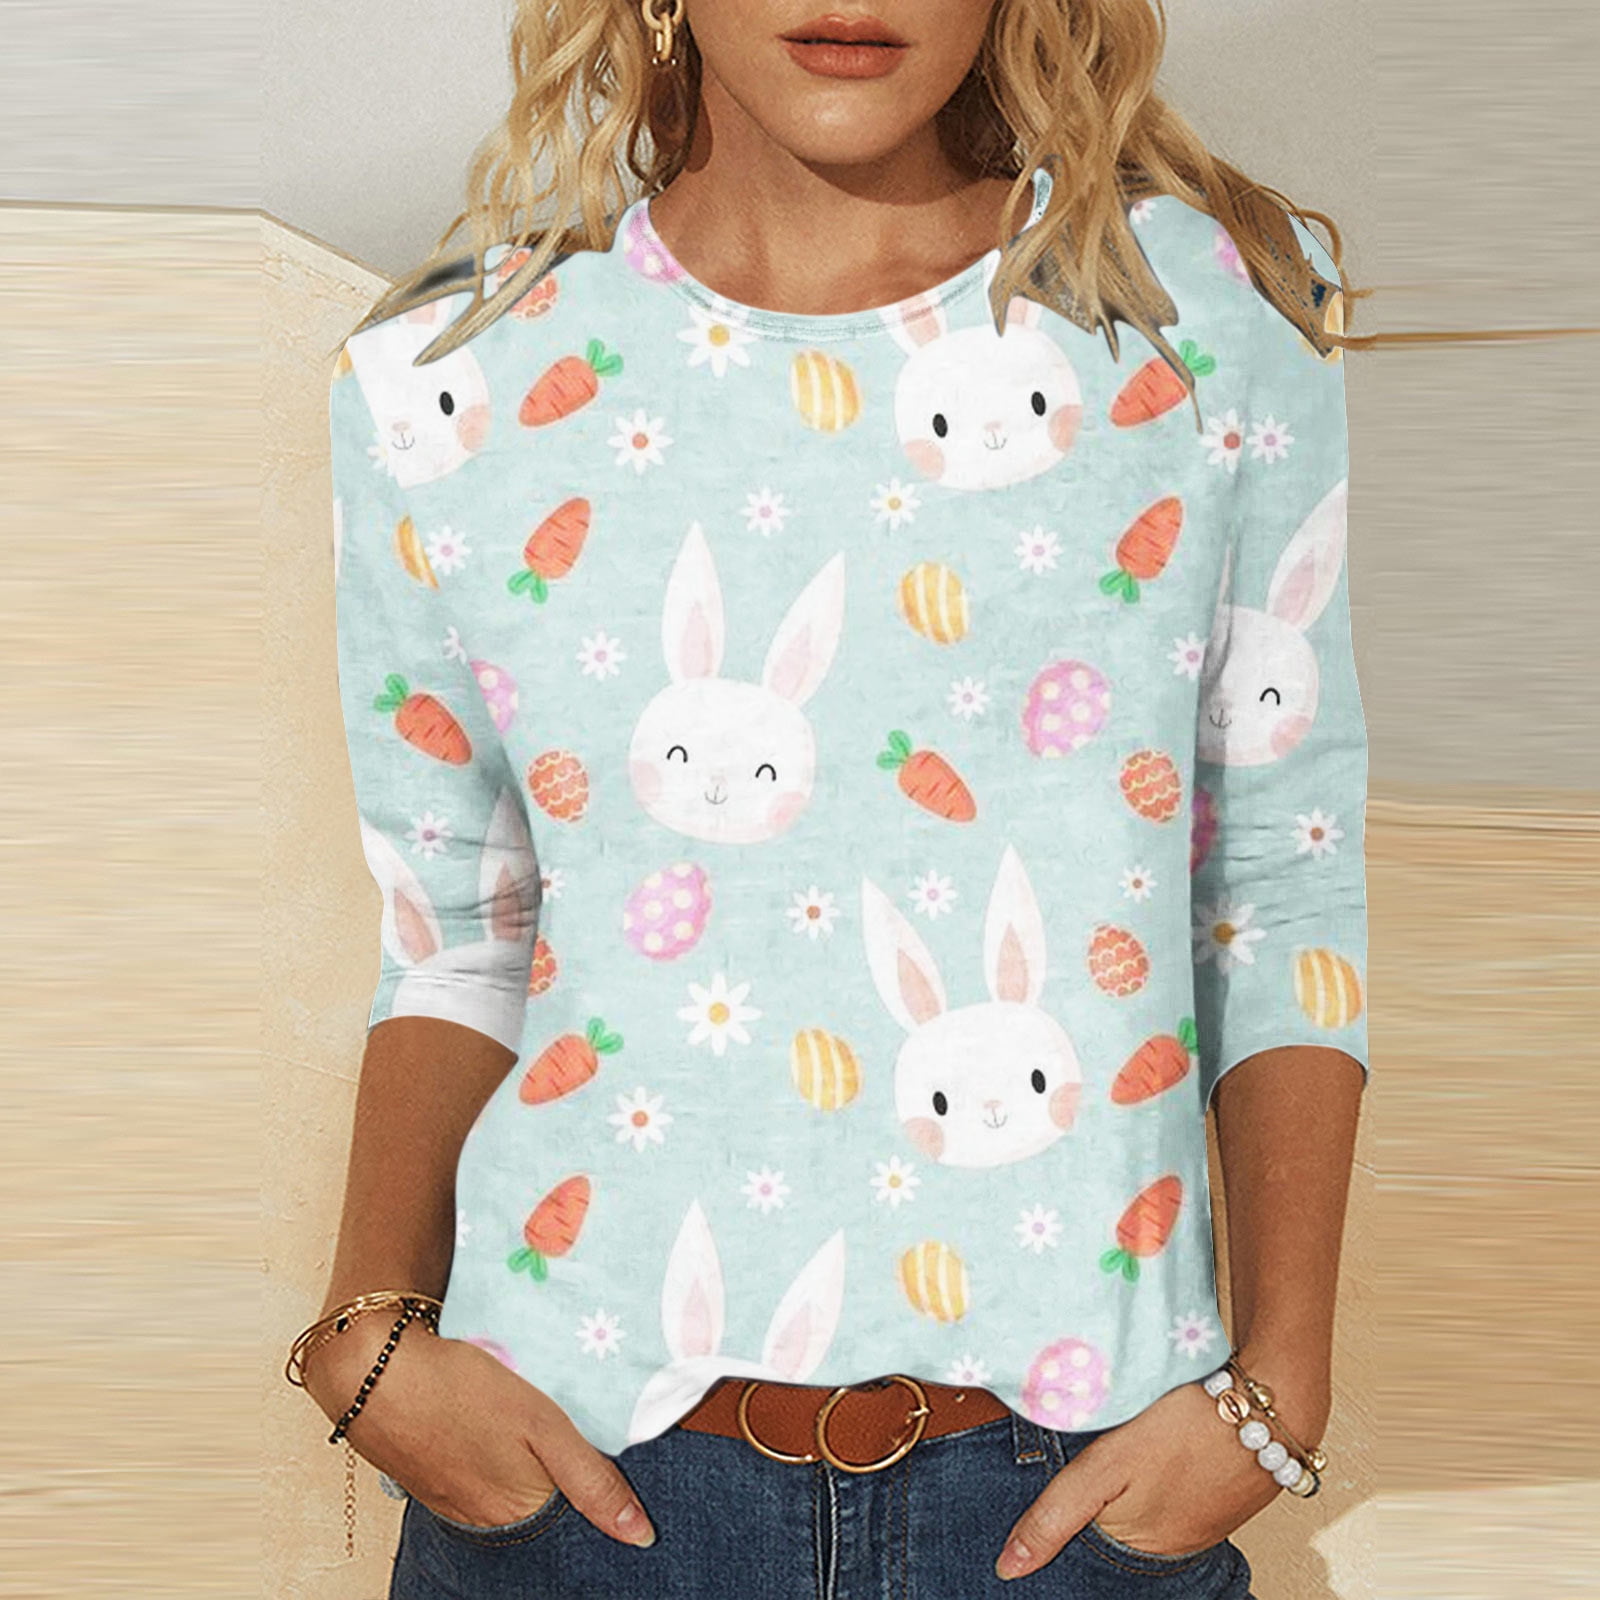 Women's Easter Shirts Bunny Eggs Easter Print Top 3:4 Sleeve Cute T ...